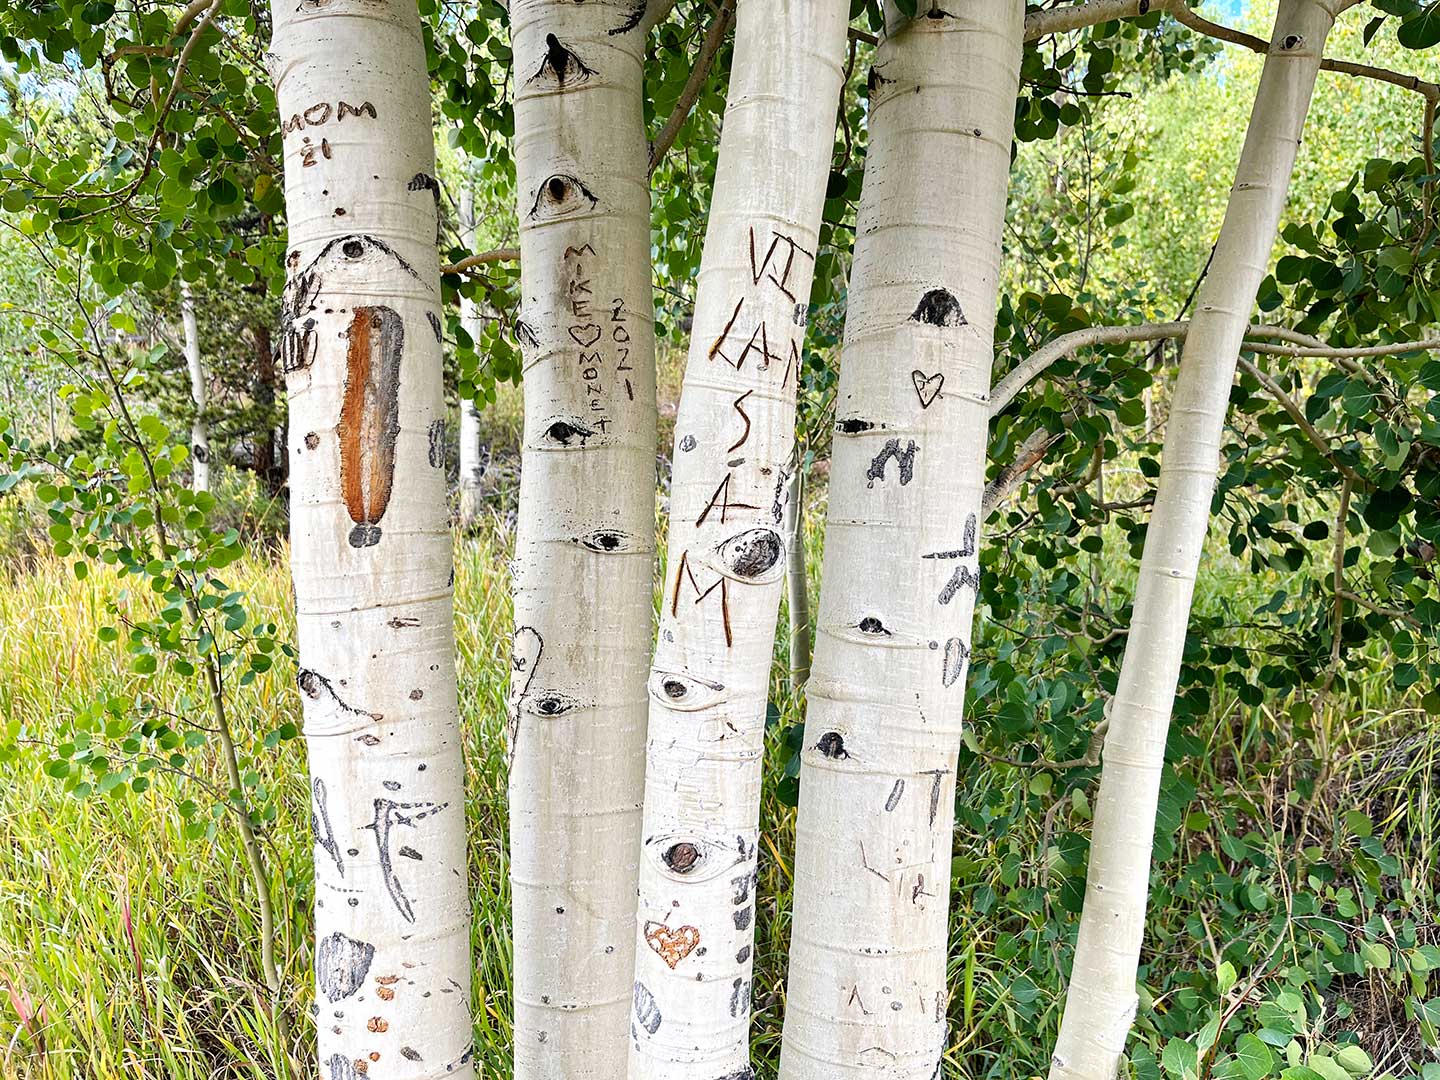 Photo of aspen tree trunks with carvings in the bark.